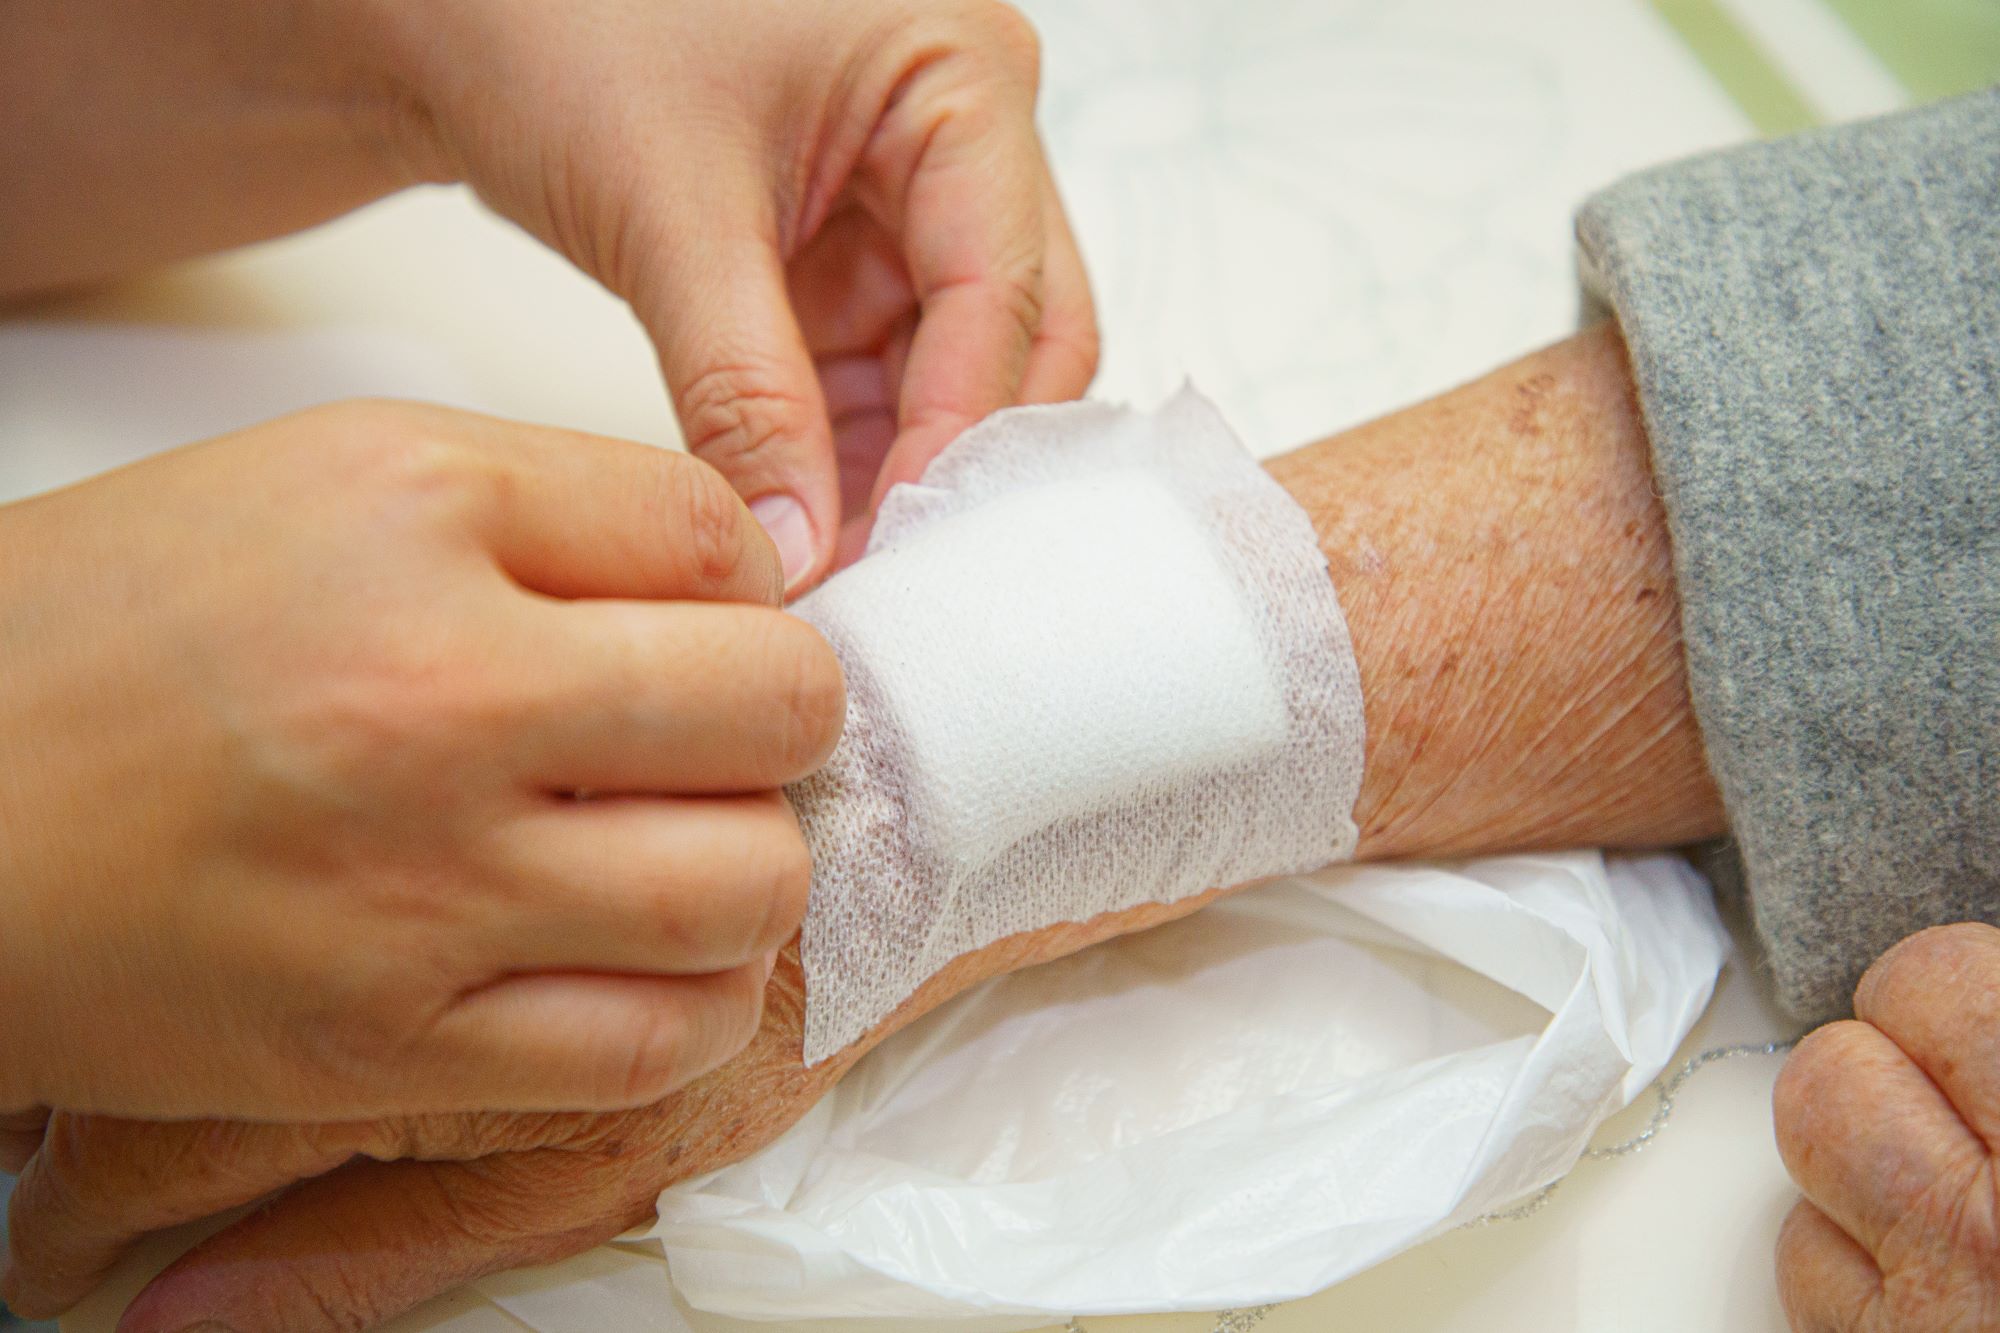 The latest innovations in wound care for elderly patients